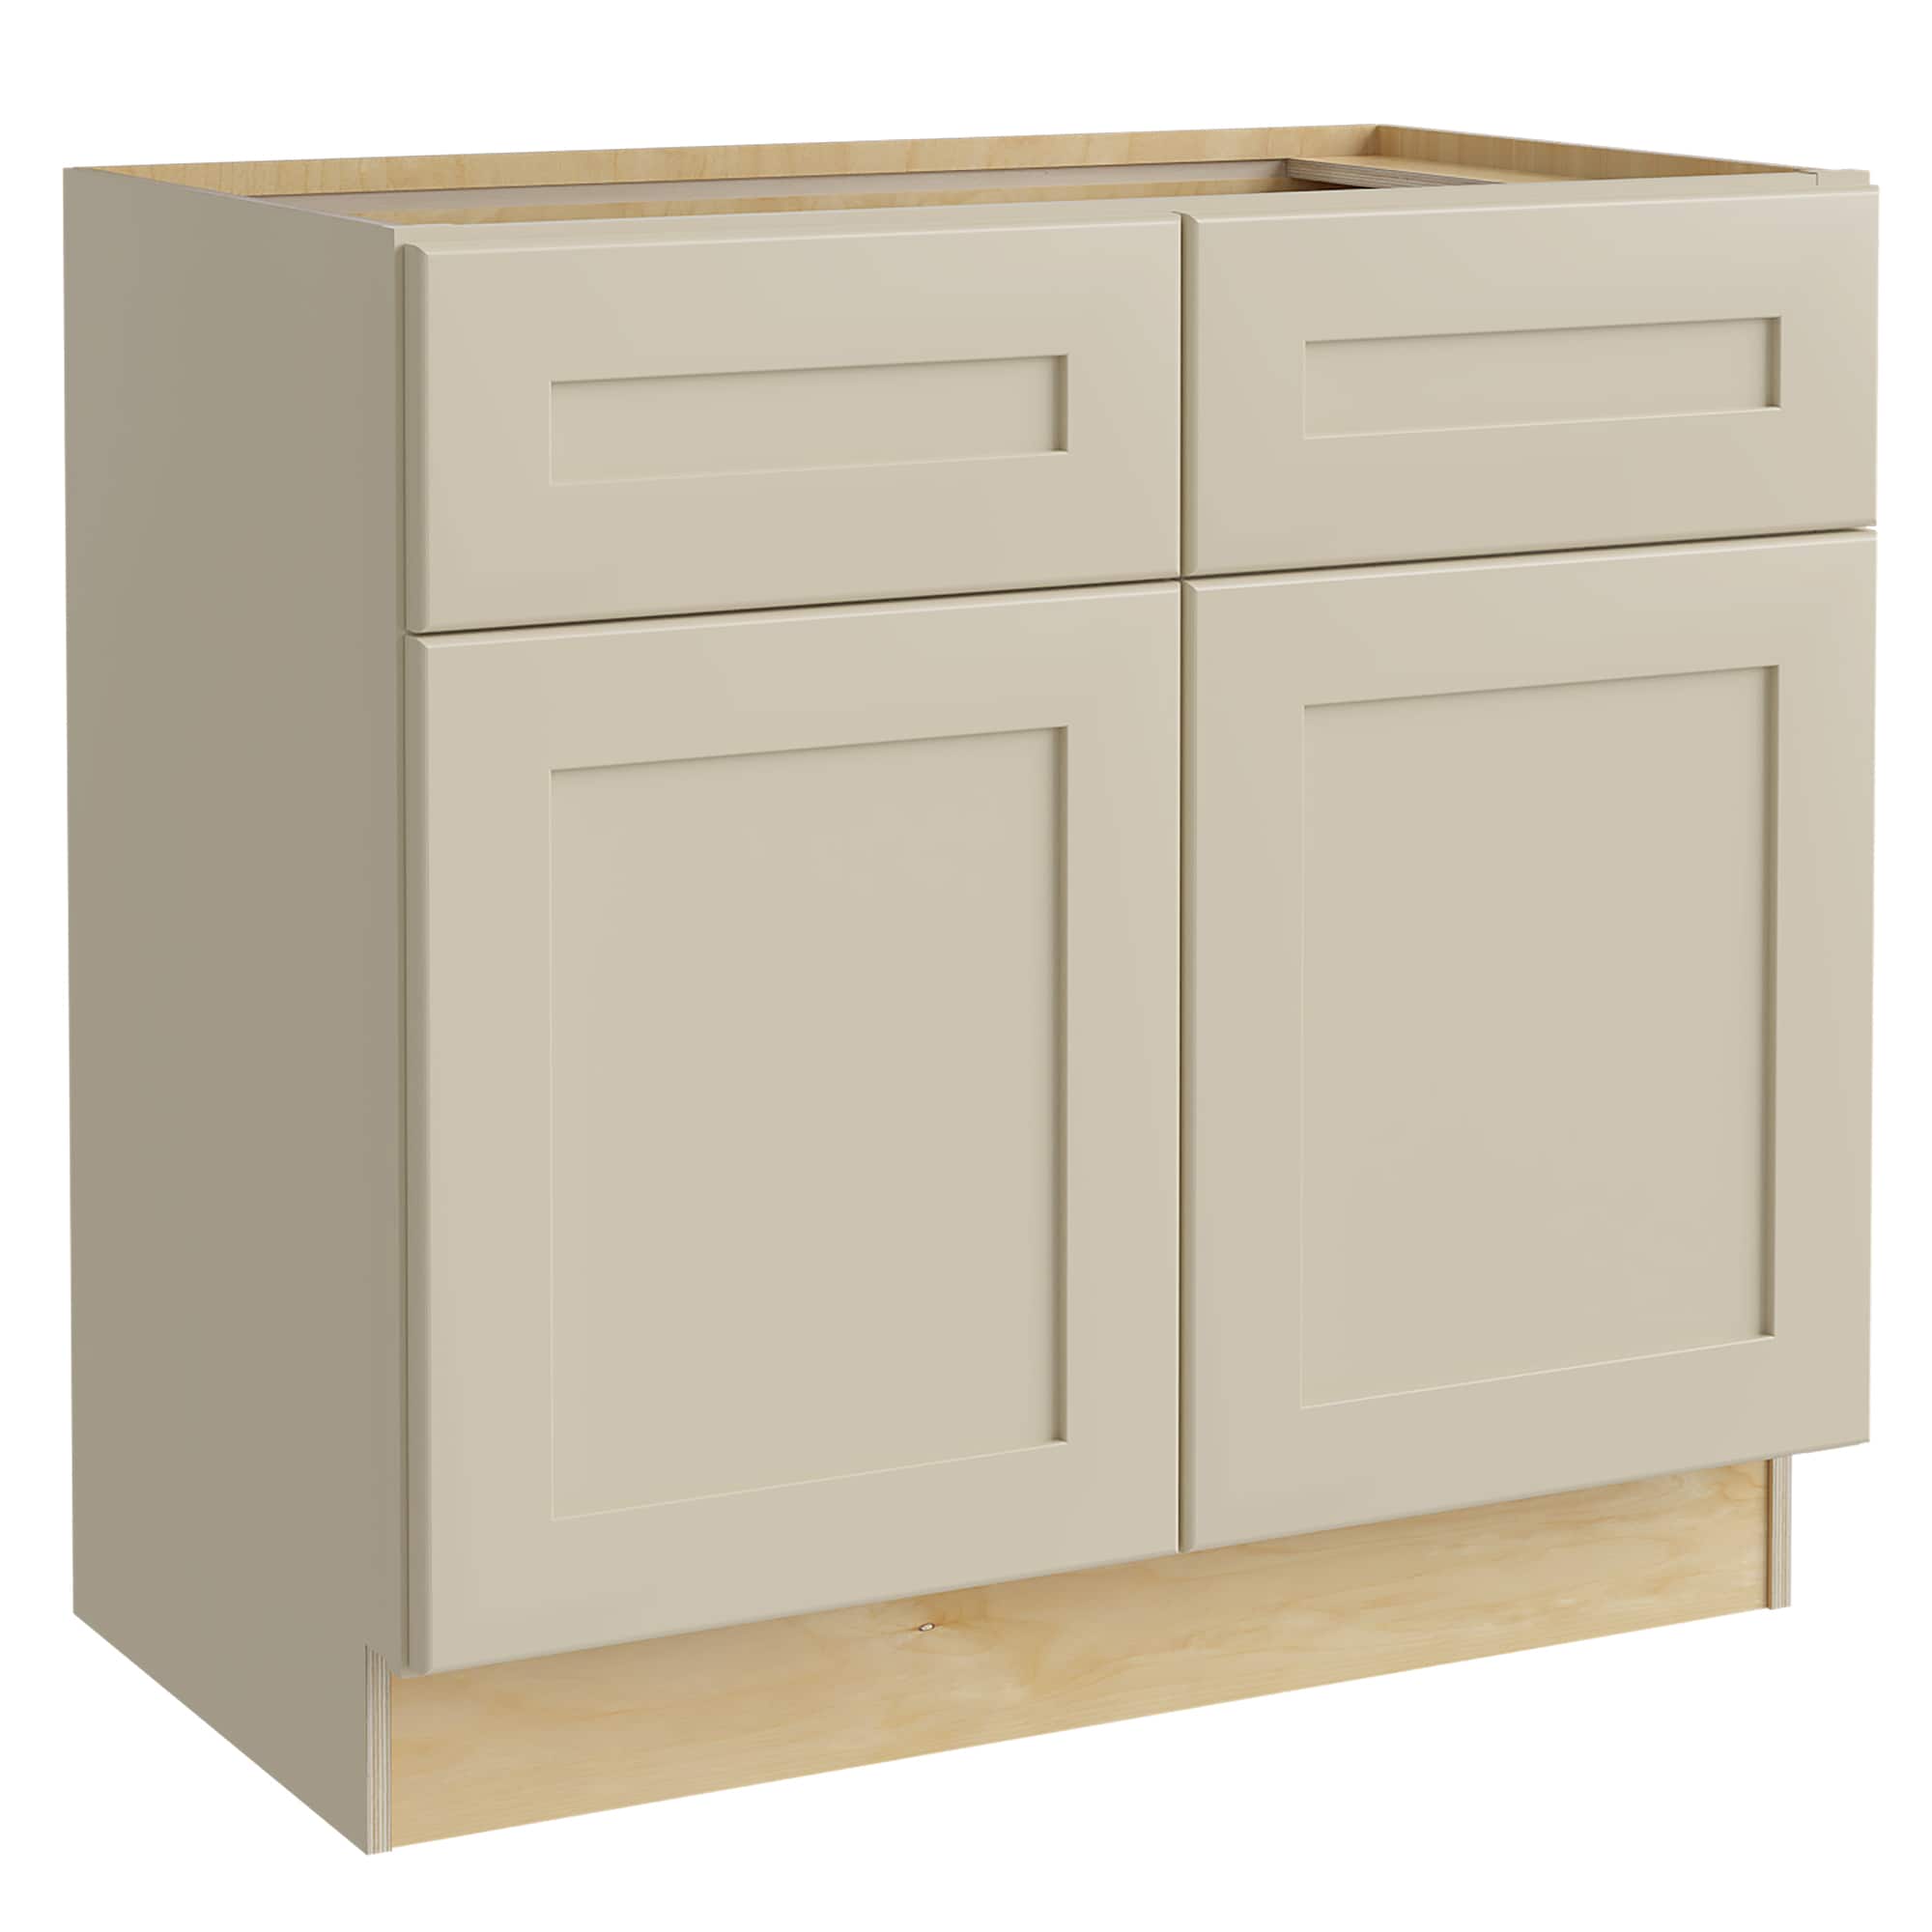 Luxxe Cabinetry 33-in W x 34.5-in H x 24-in D Norfolk Blended Cream Painted Door and Drawer Base Fully Assembled Semi-custom Cabinet in Off-White